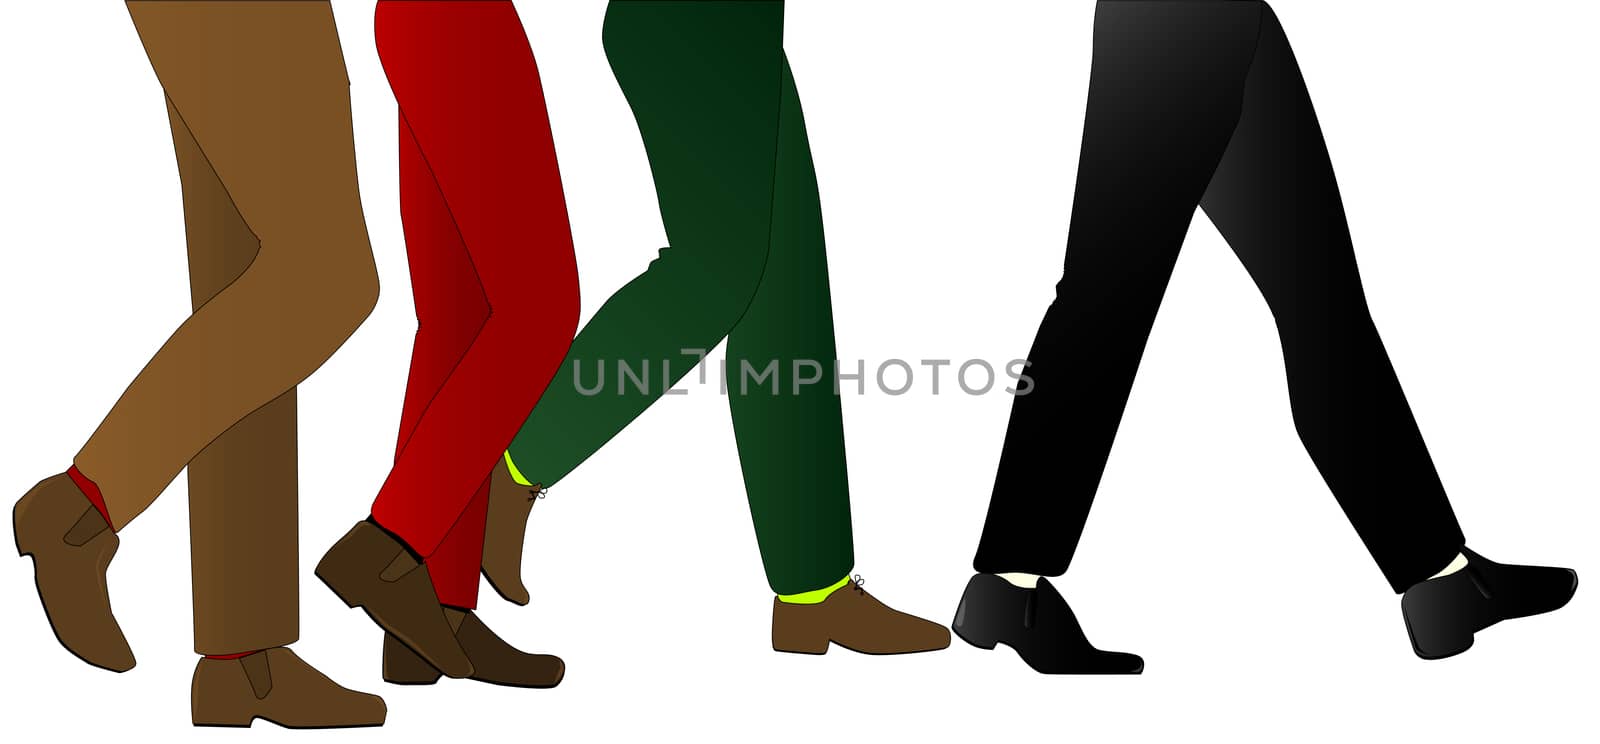 A collection of male legs wearing trousers walking with the lead pair striding